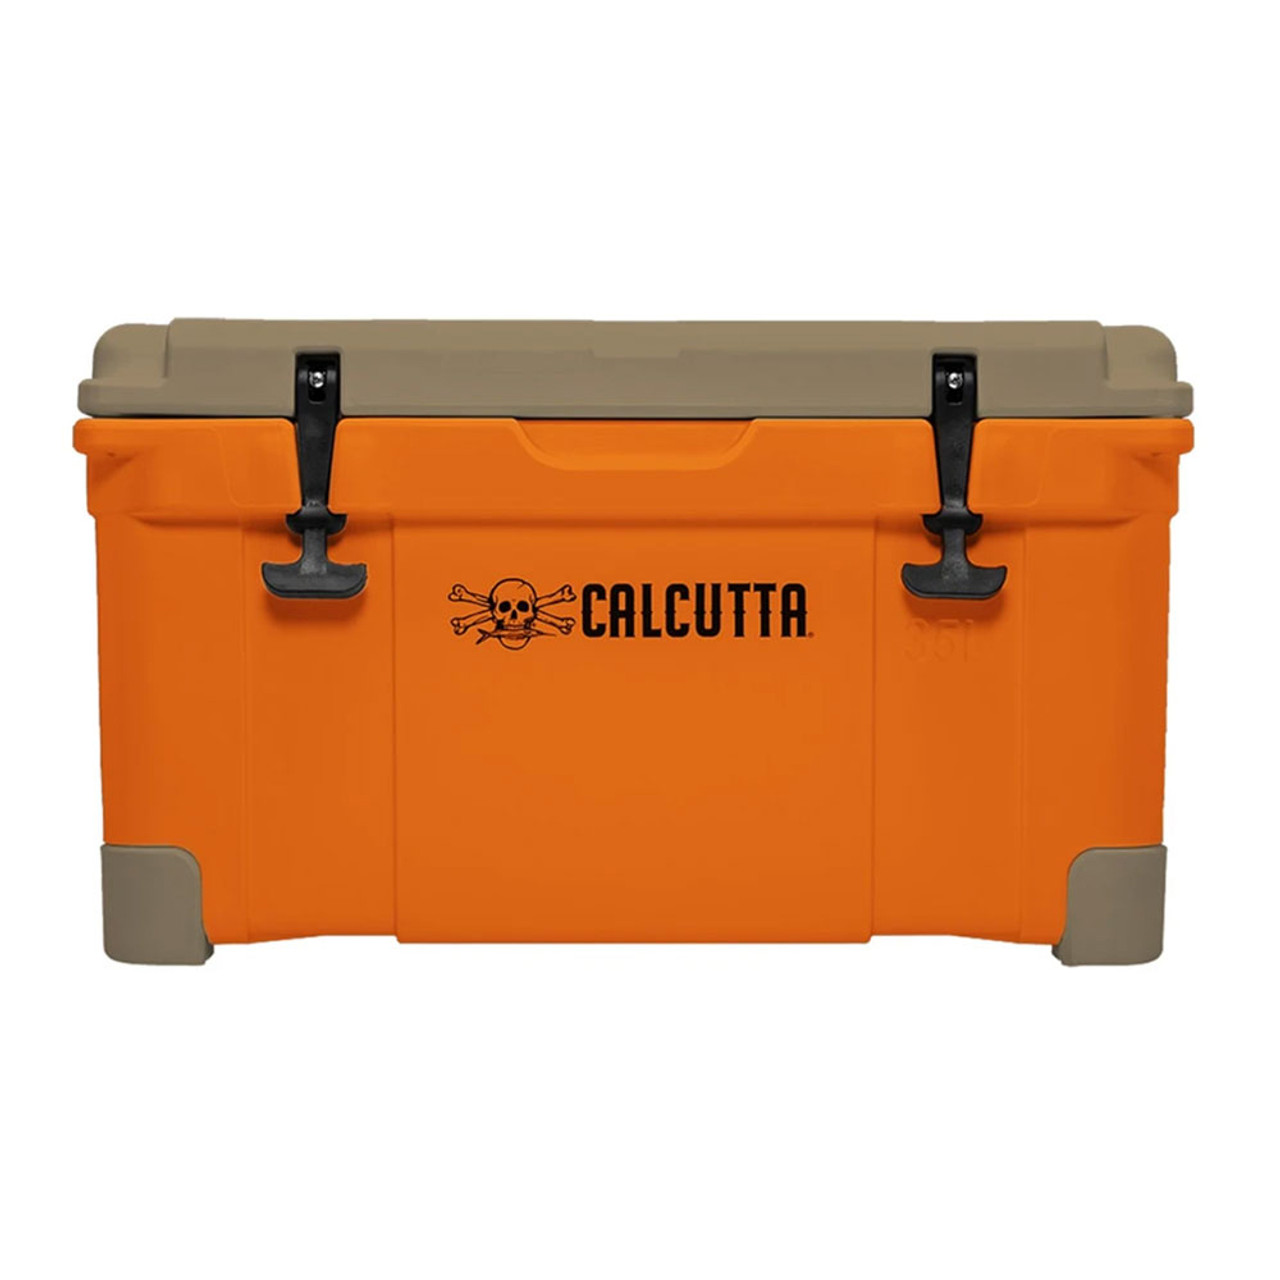 Calcutta Renegade Cooler 125 Liter White w/Removeable Tray, Divider & LED Drain Plug, EZ-Lift Rope Handles, 45.1"Lx 19.2"Wx19.7"H